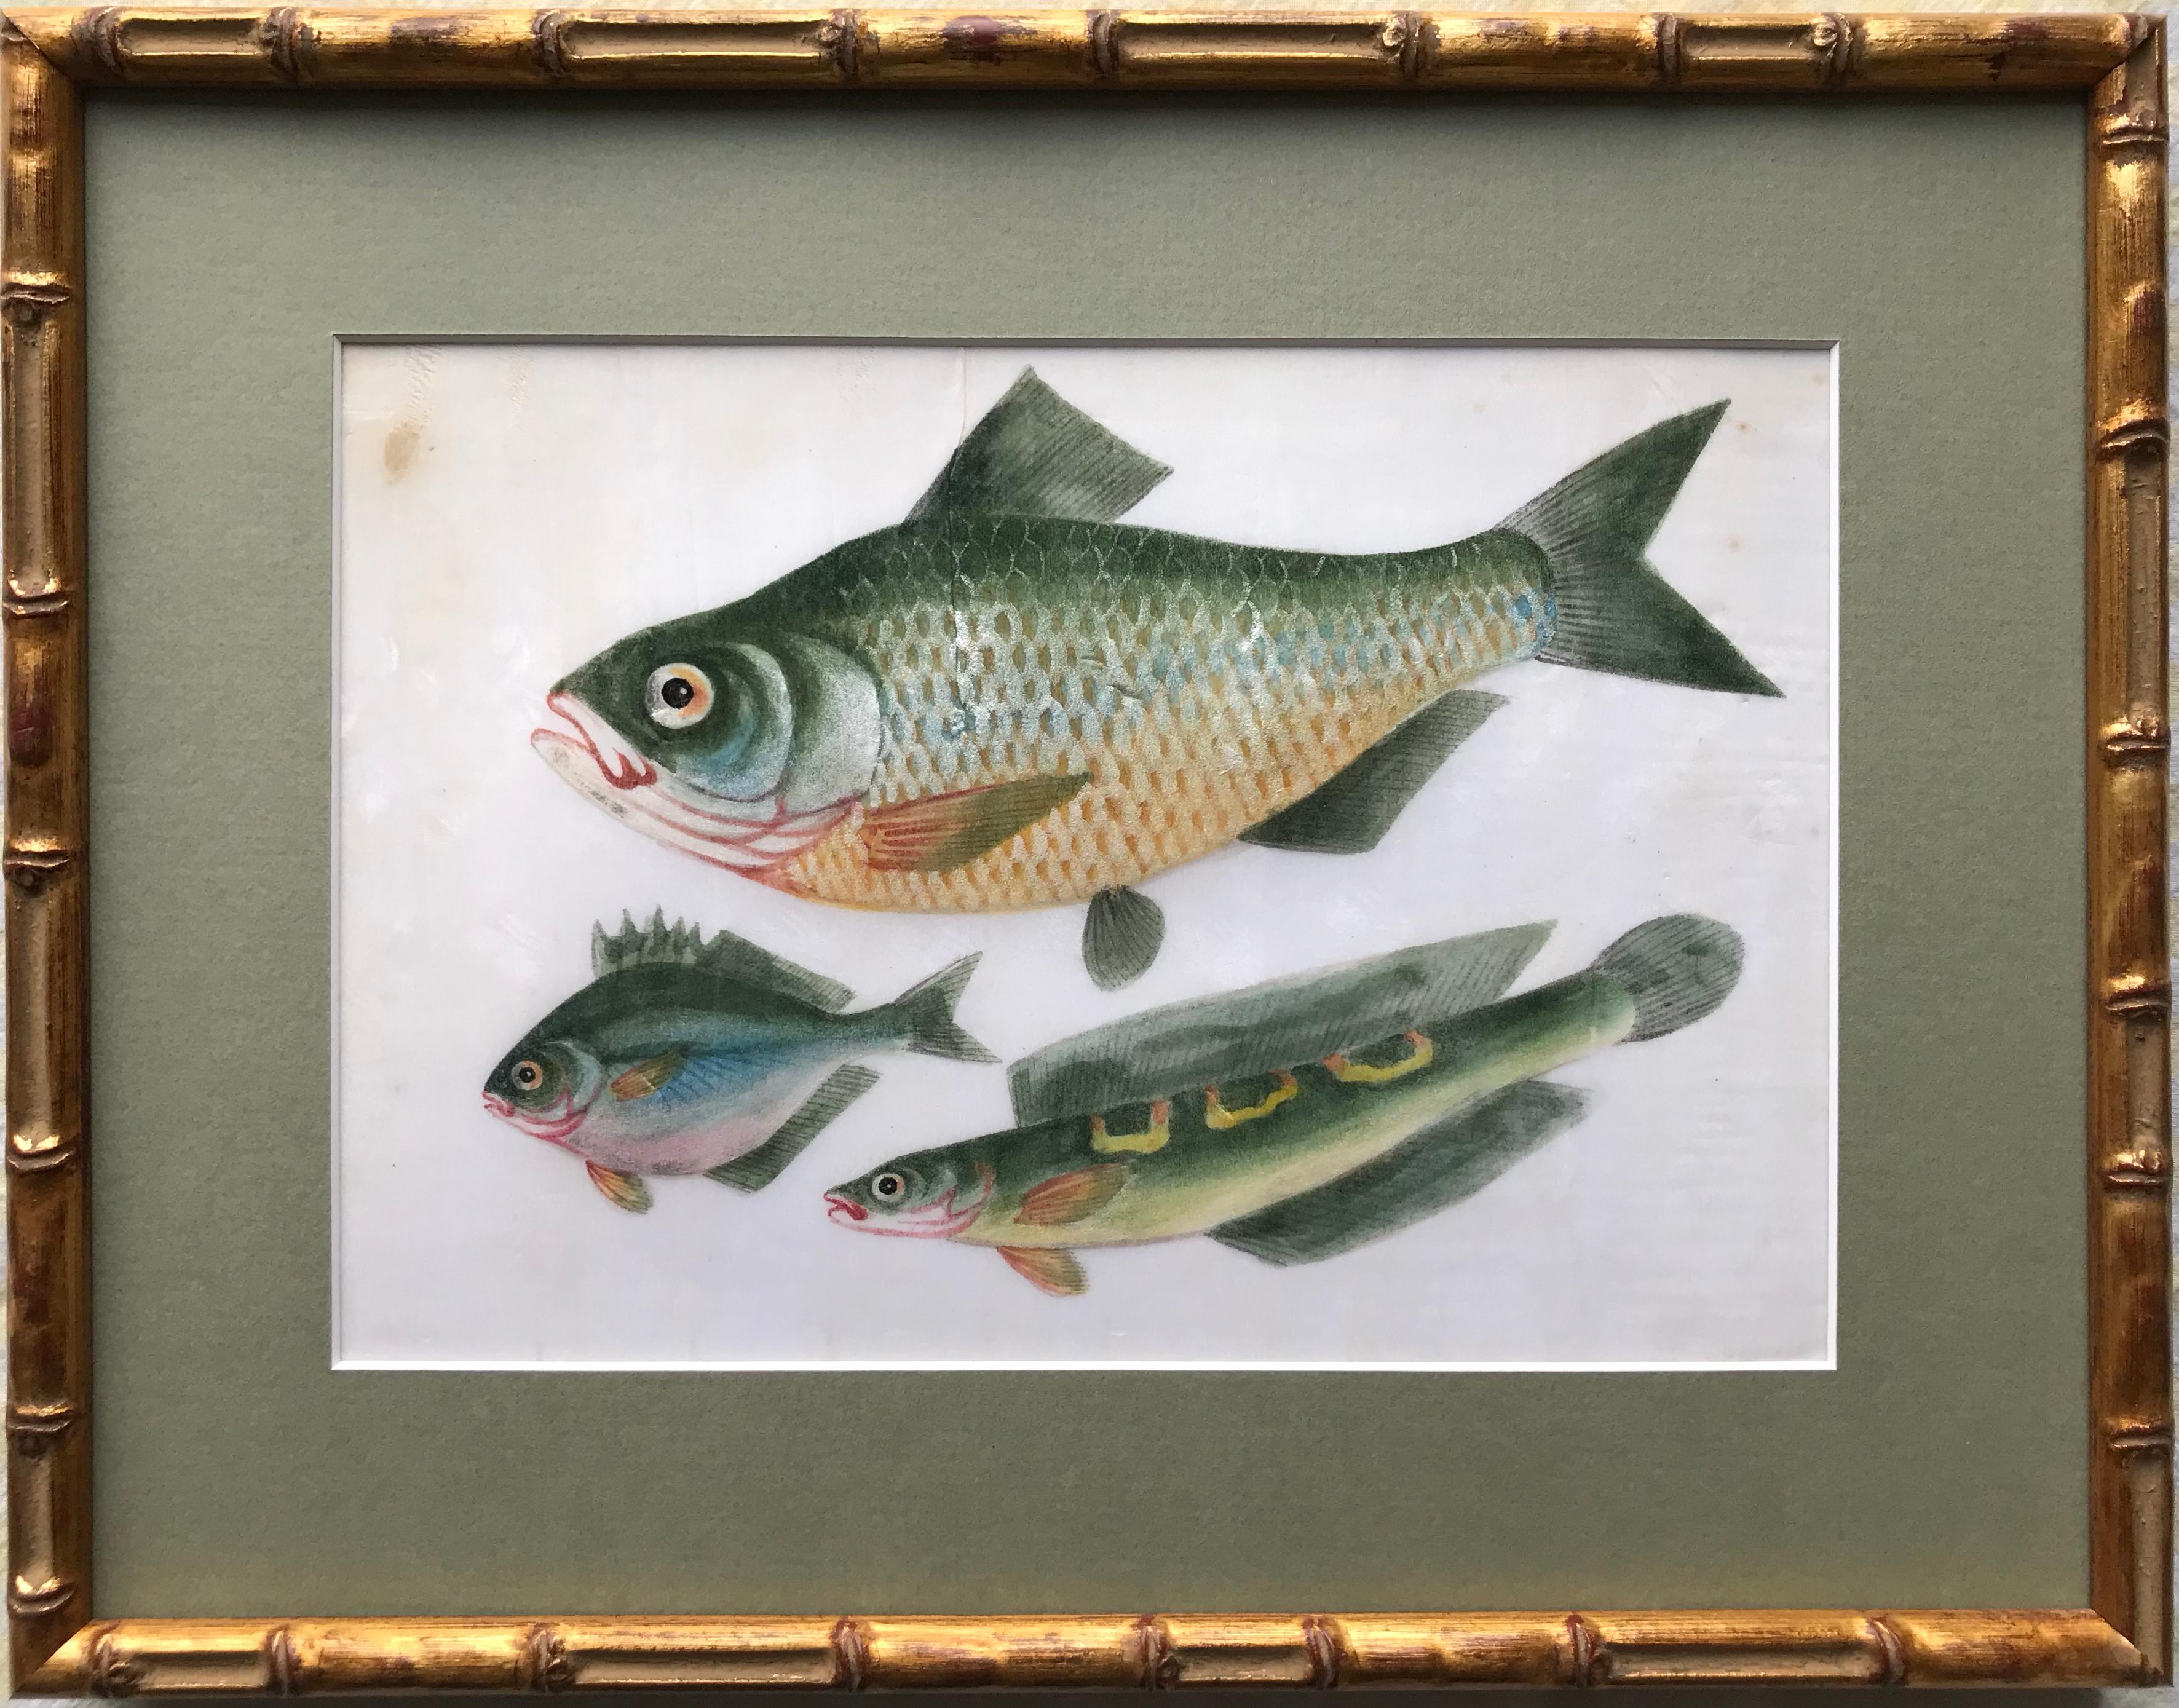 A pair of 19th Century Chinese Export Rice Pith Paper watercolors of fish - Art by 19th Century Chinese school